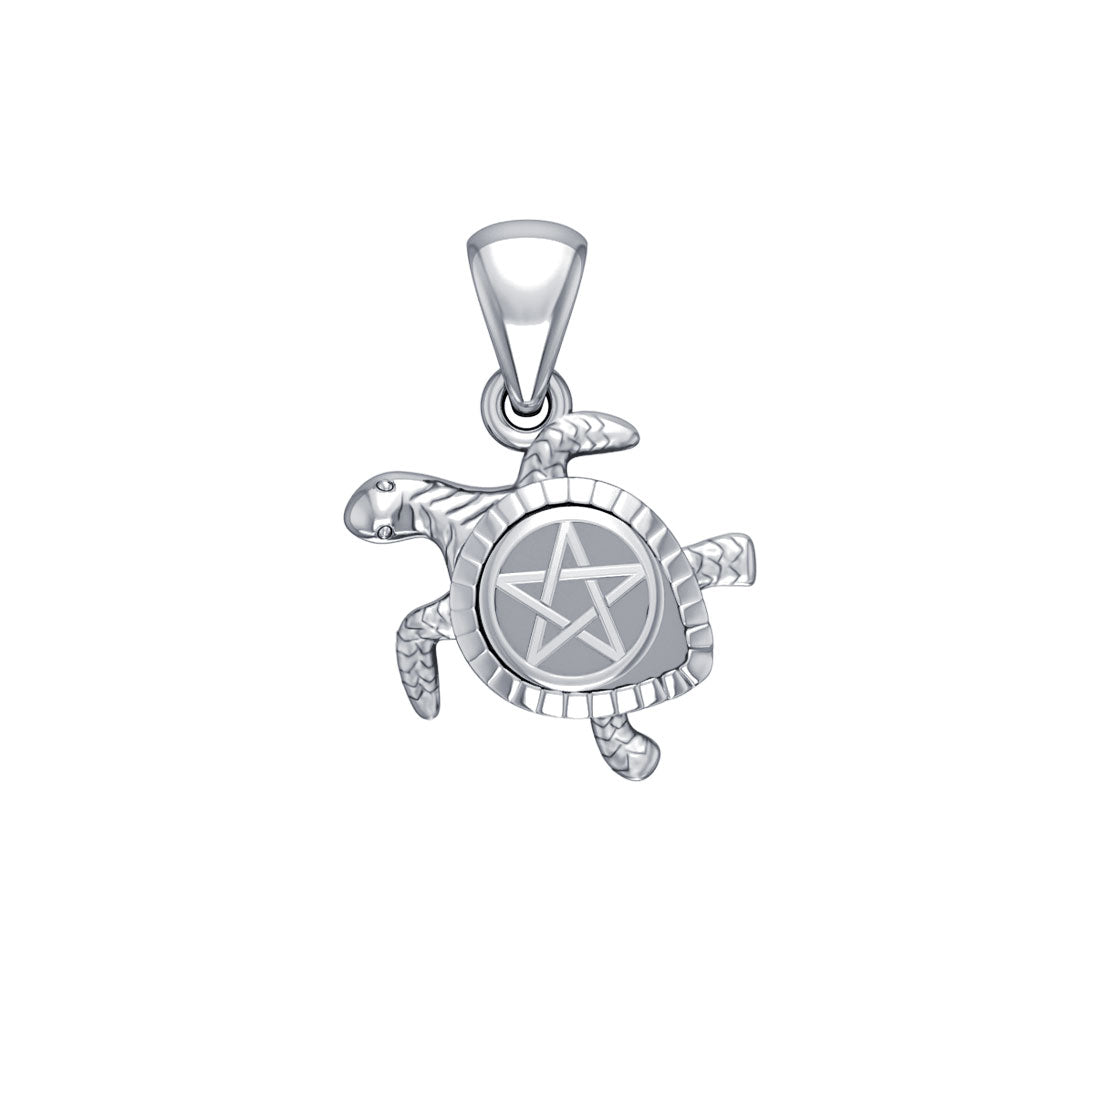 Sea Turtle with Pentacle 14K White Gold Pendant WPD5205